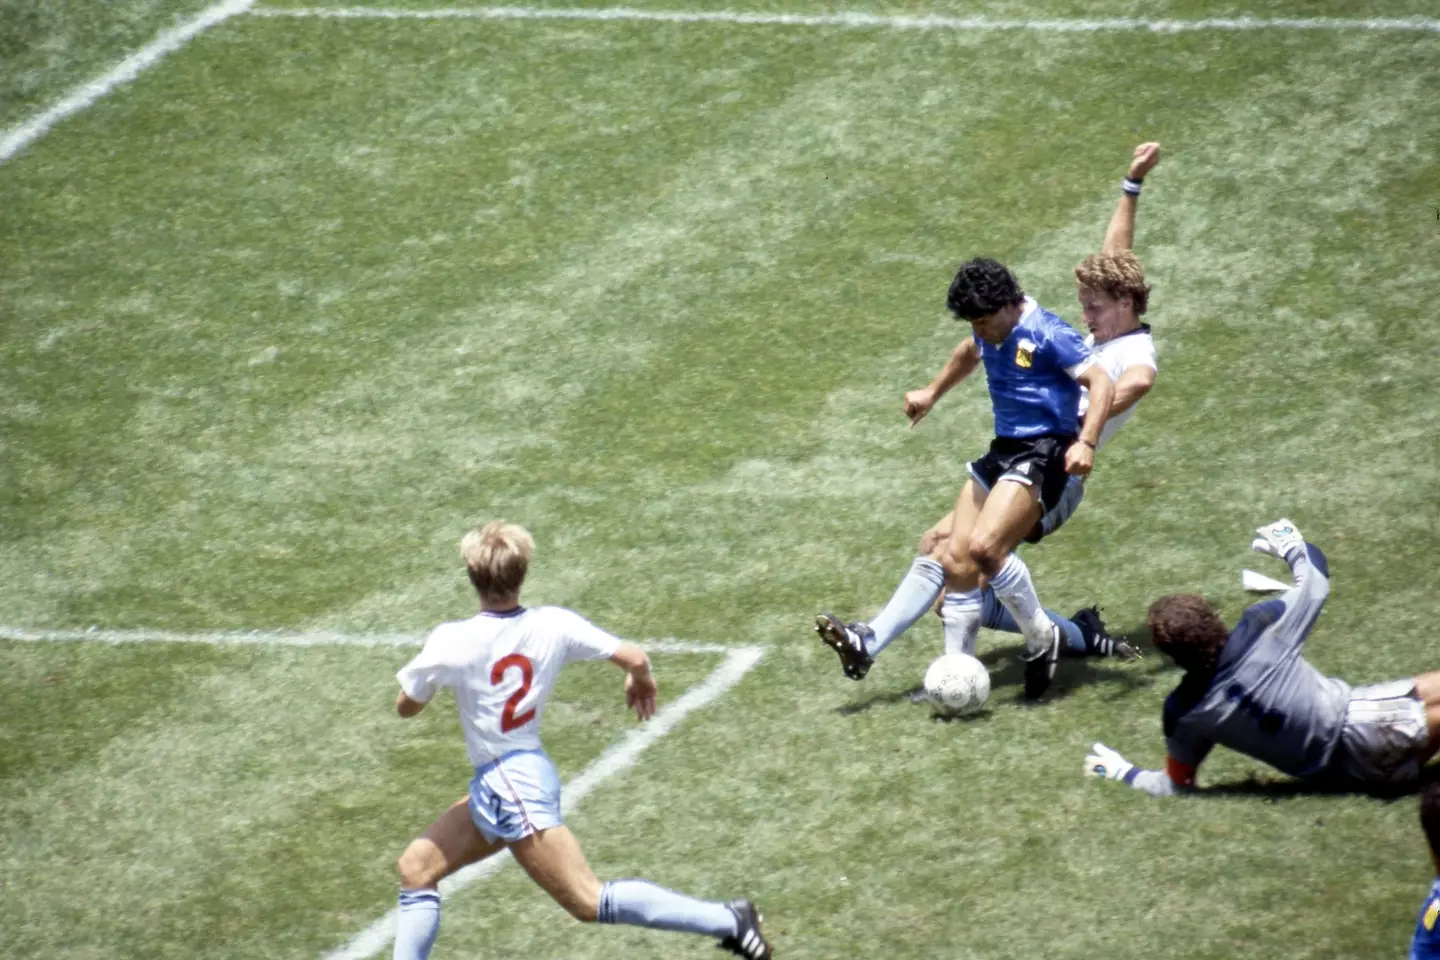 Maradona got past Shilton for the other goal on the day. Image: PA Images